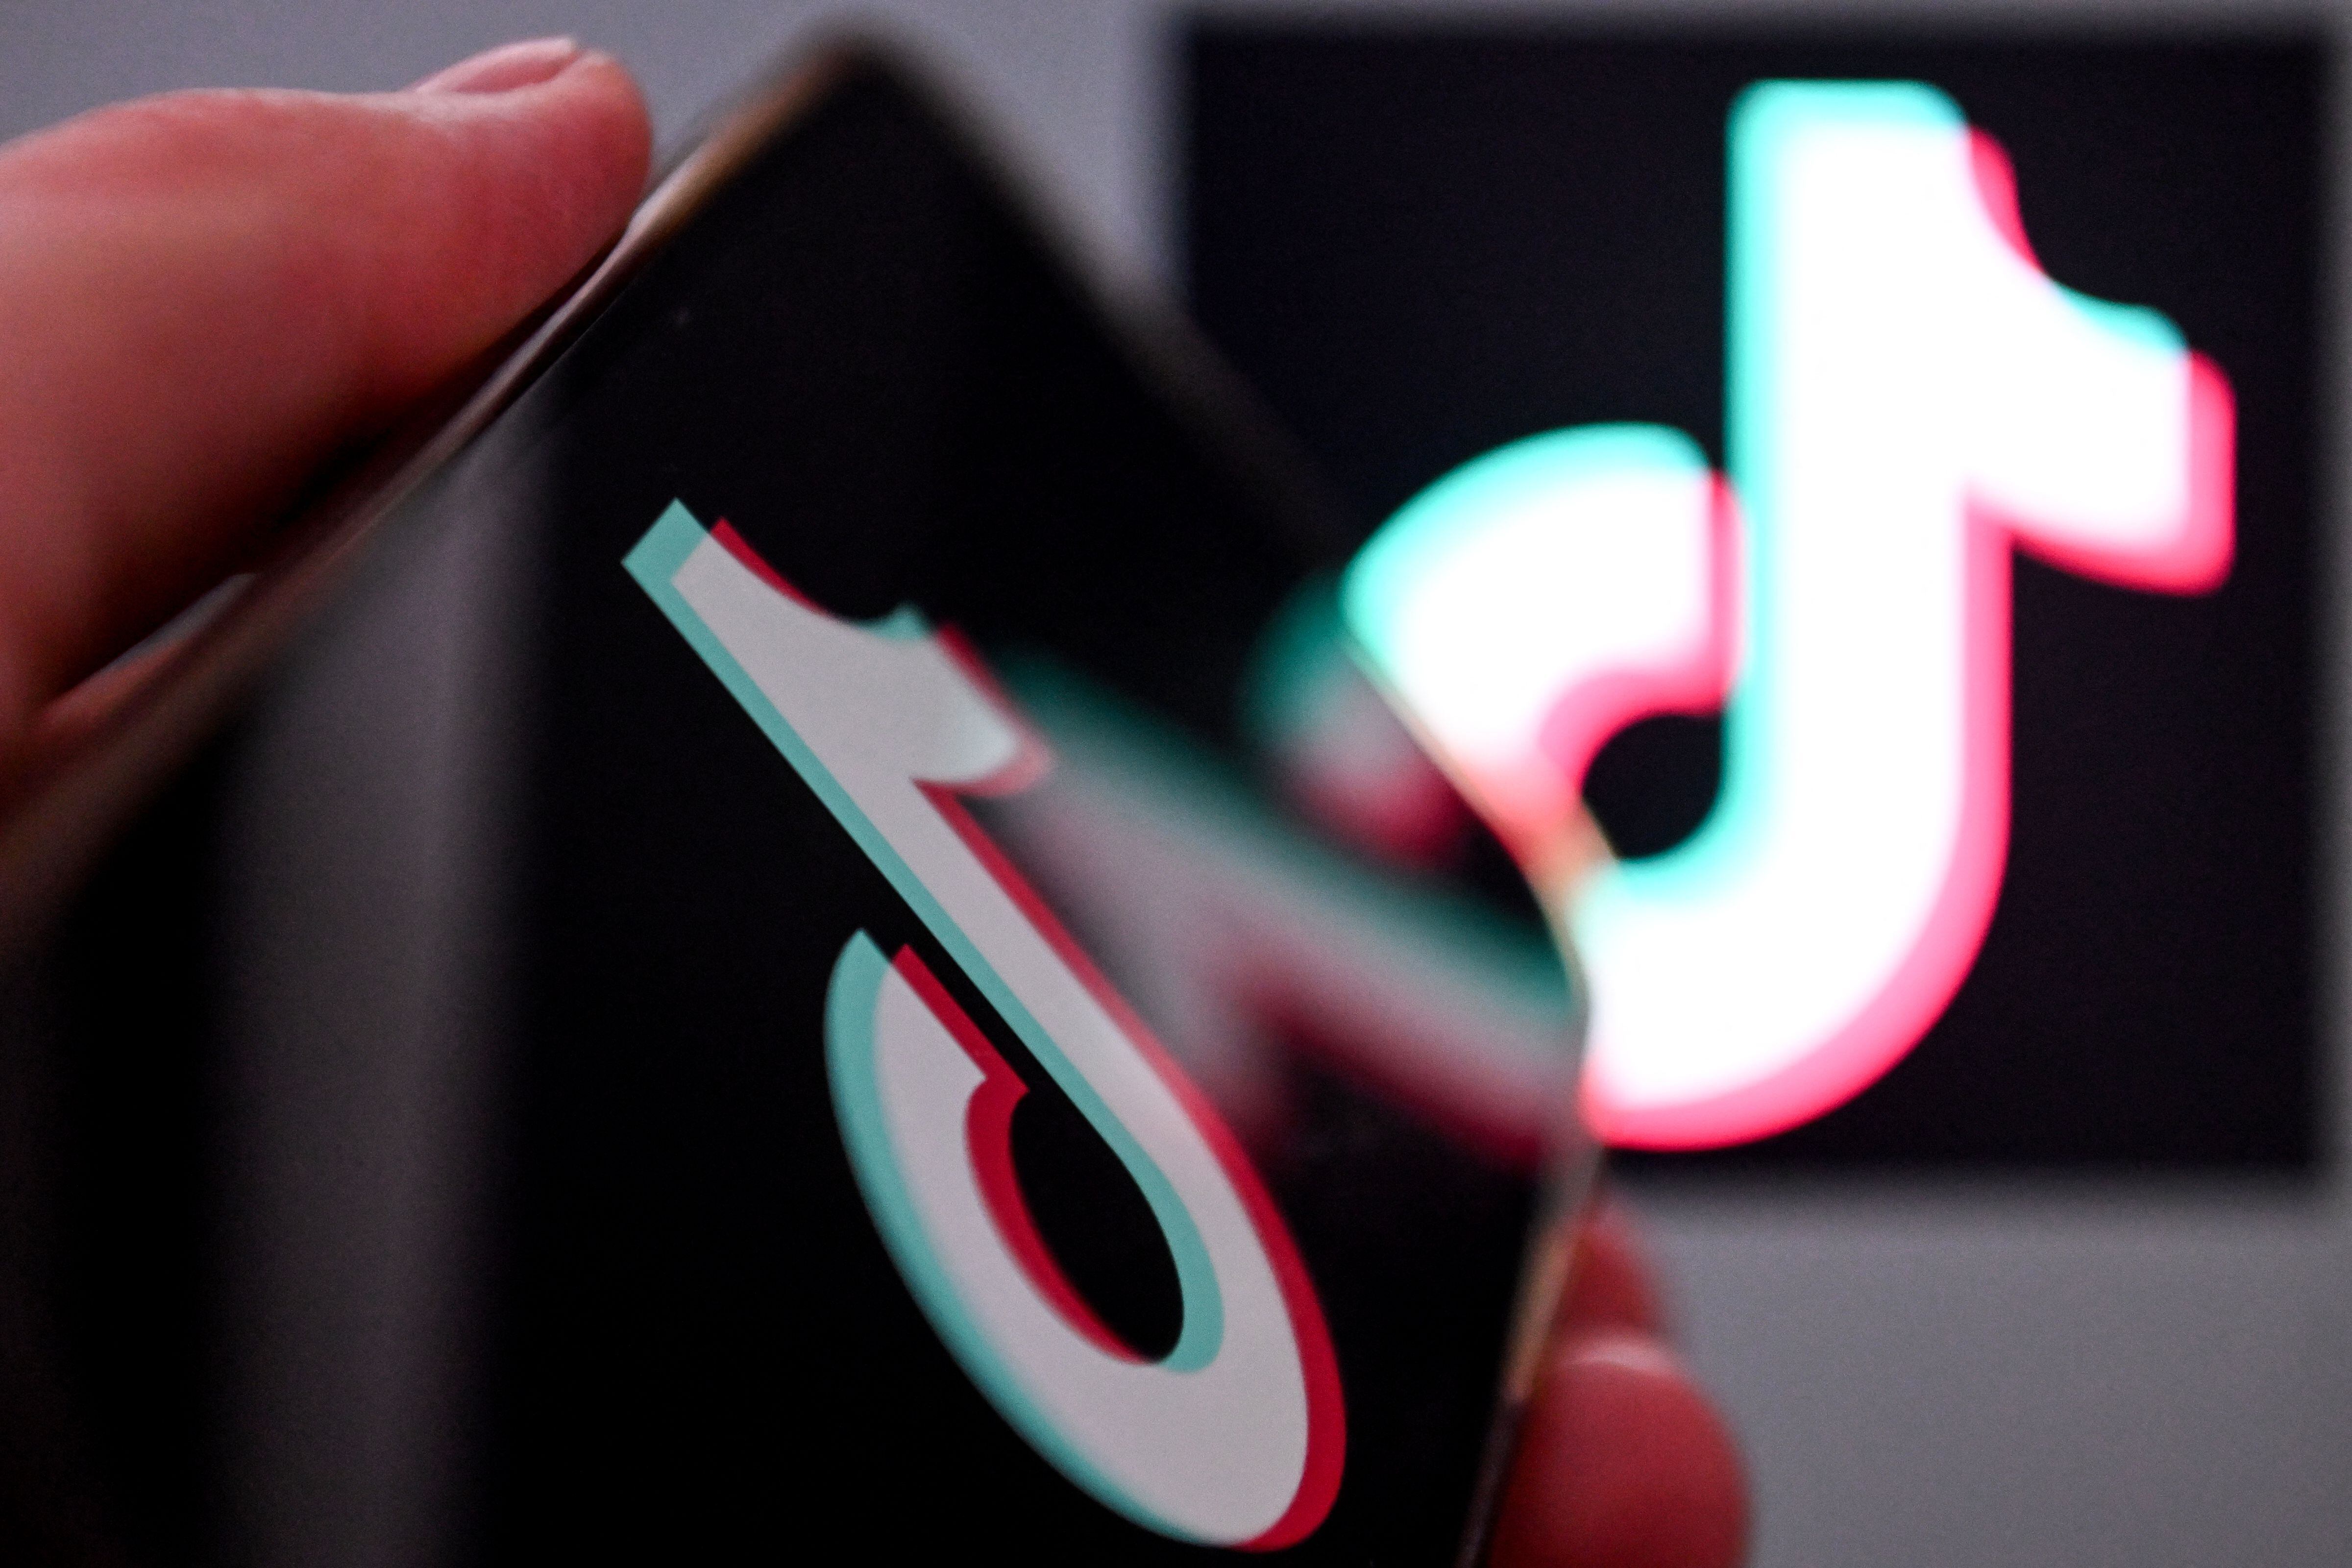 Tiktok is one of the most popular apps globally.